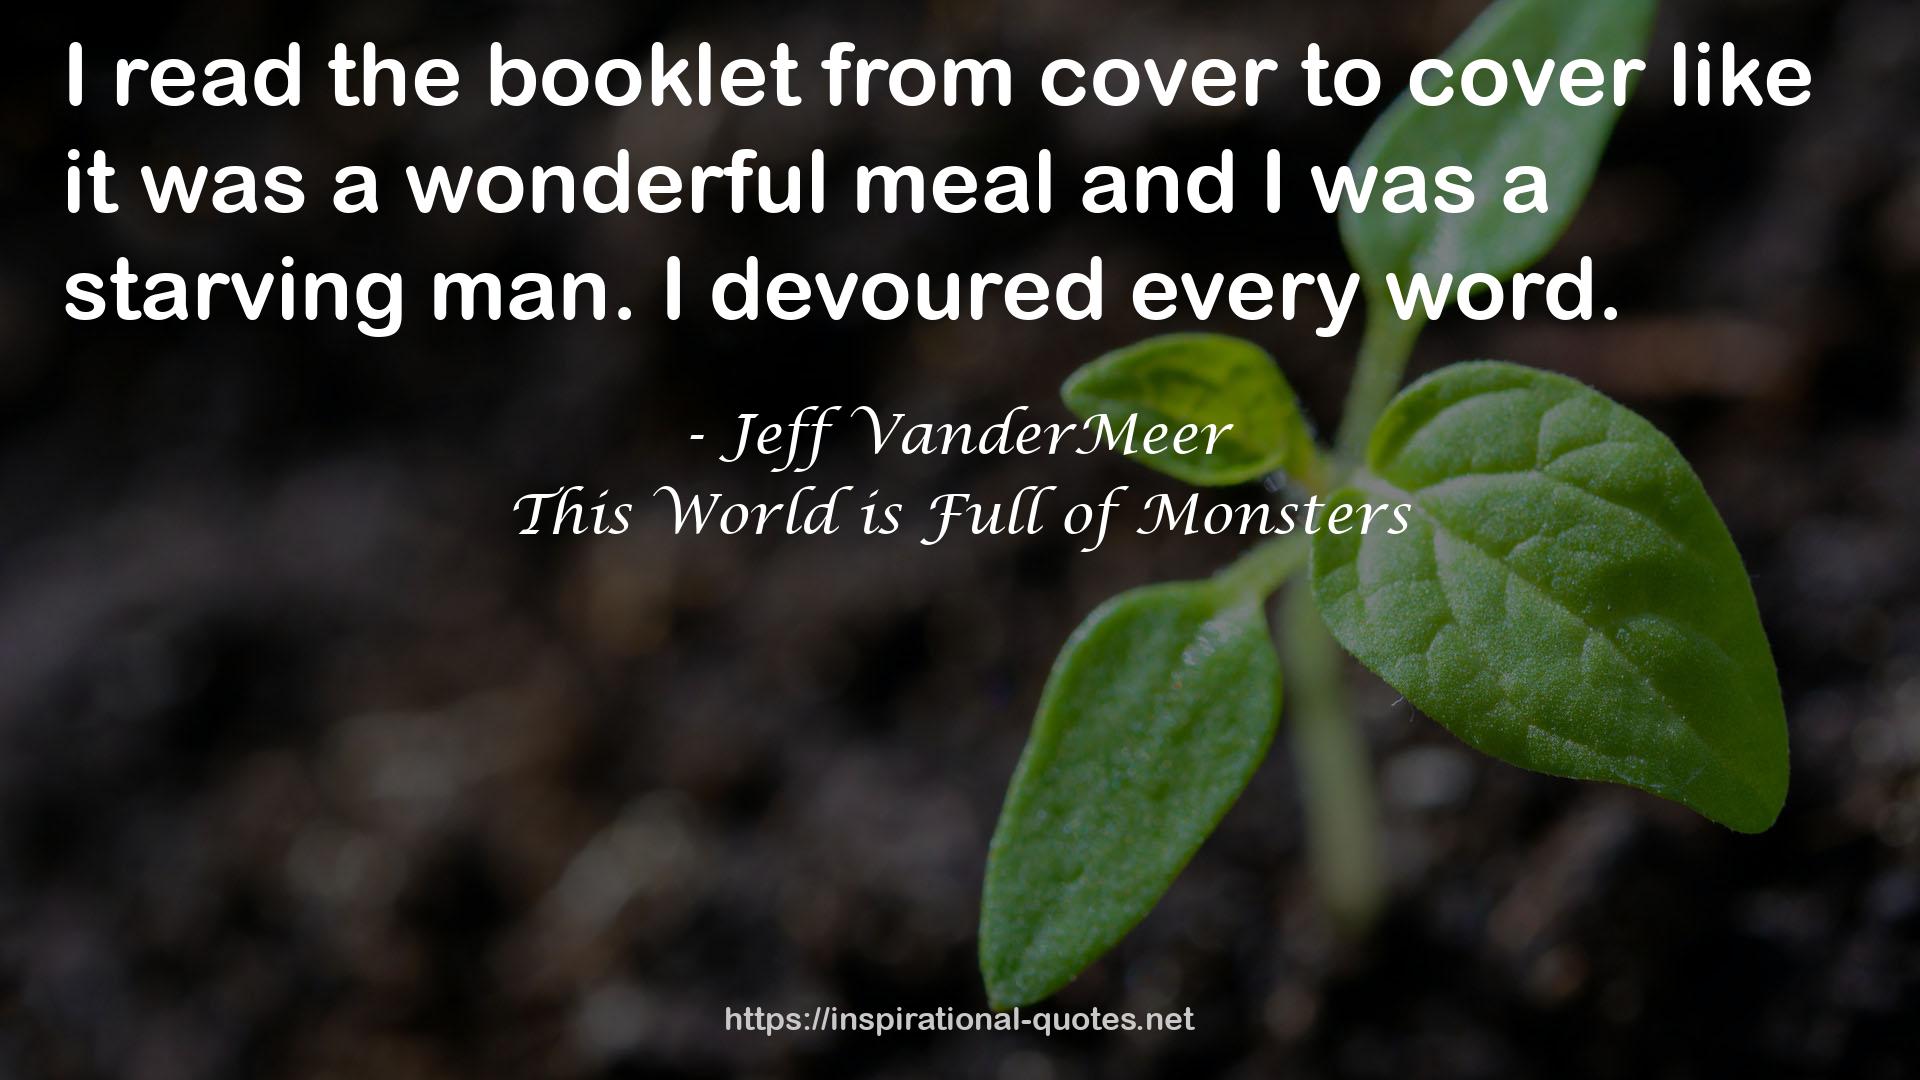 This World is Full of Monsters QUOTES